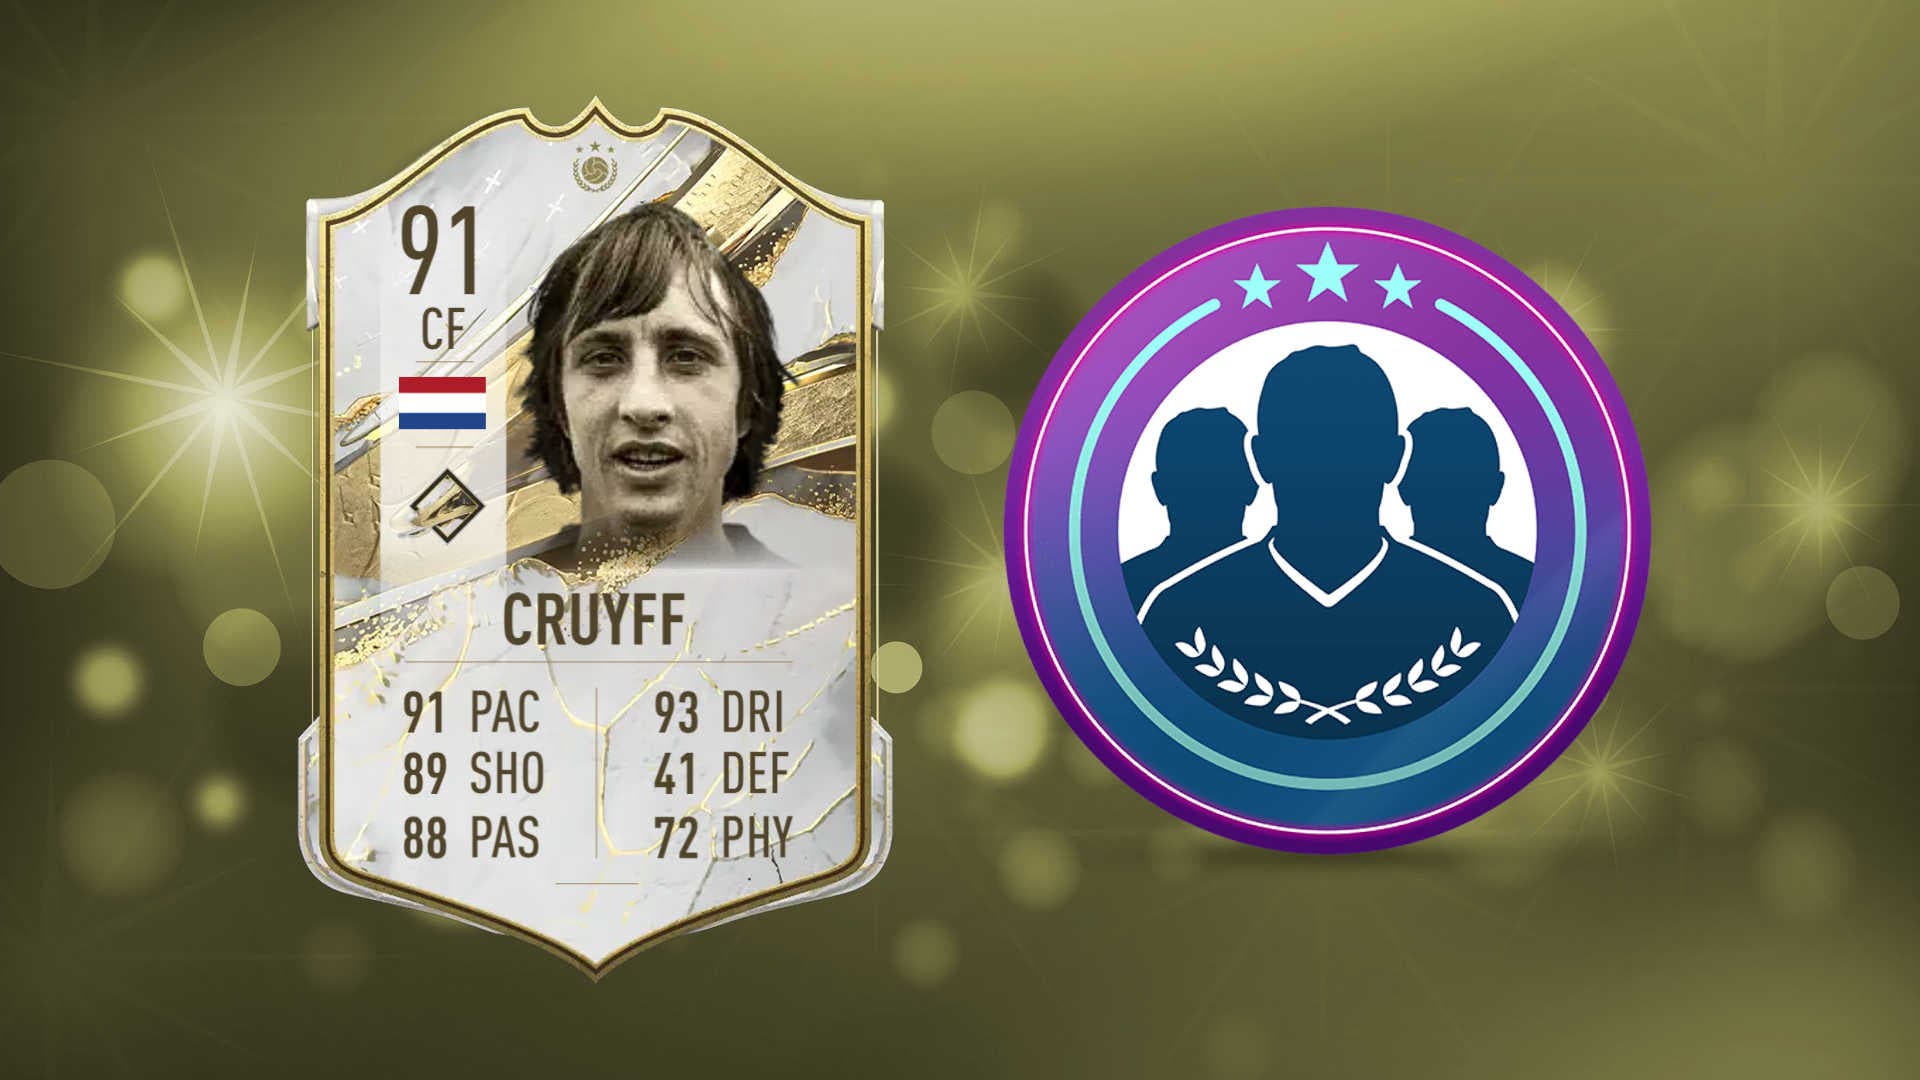 FIFA 23: Johan Cruyff Medium Icon is available on SBC and that’s what they want him to do